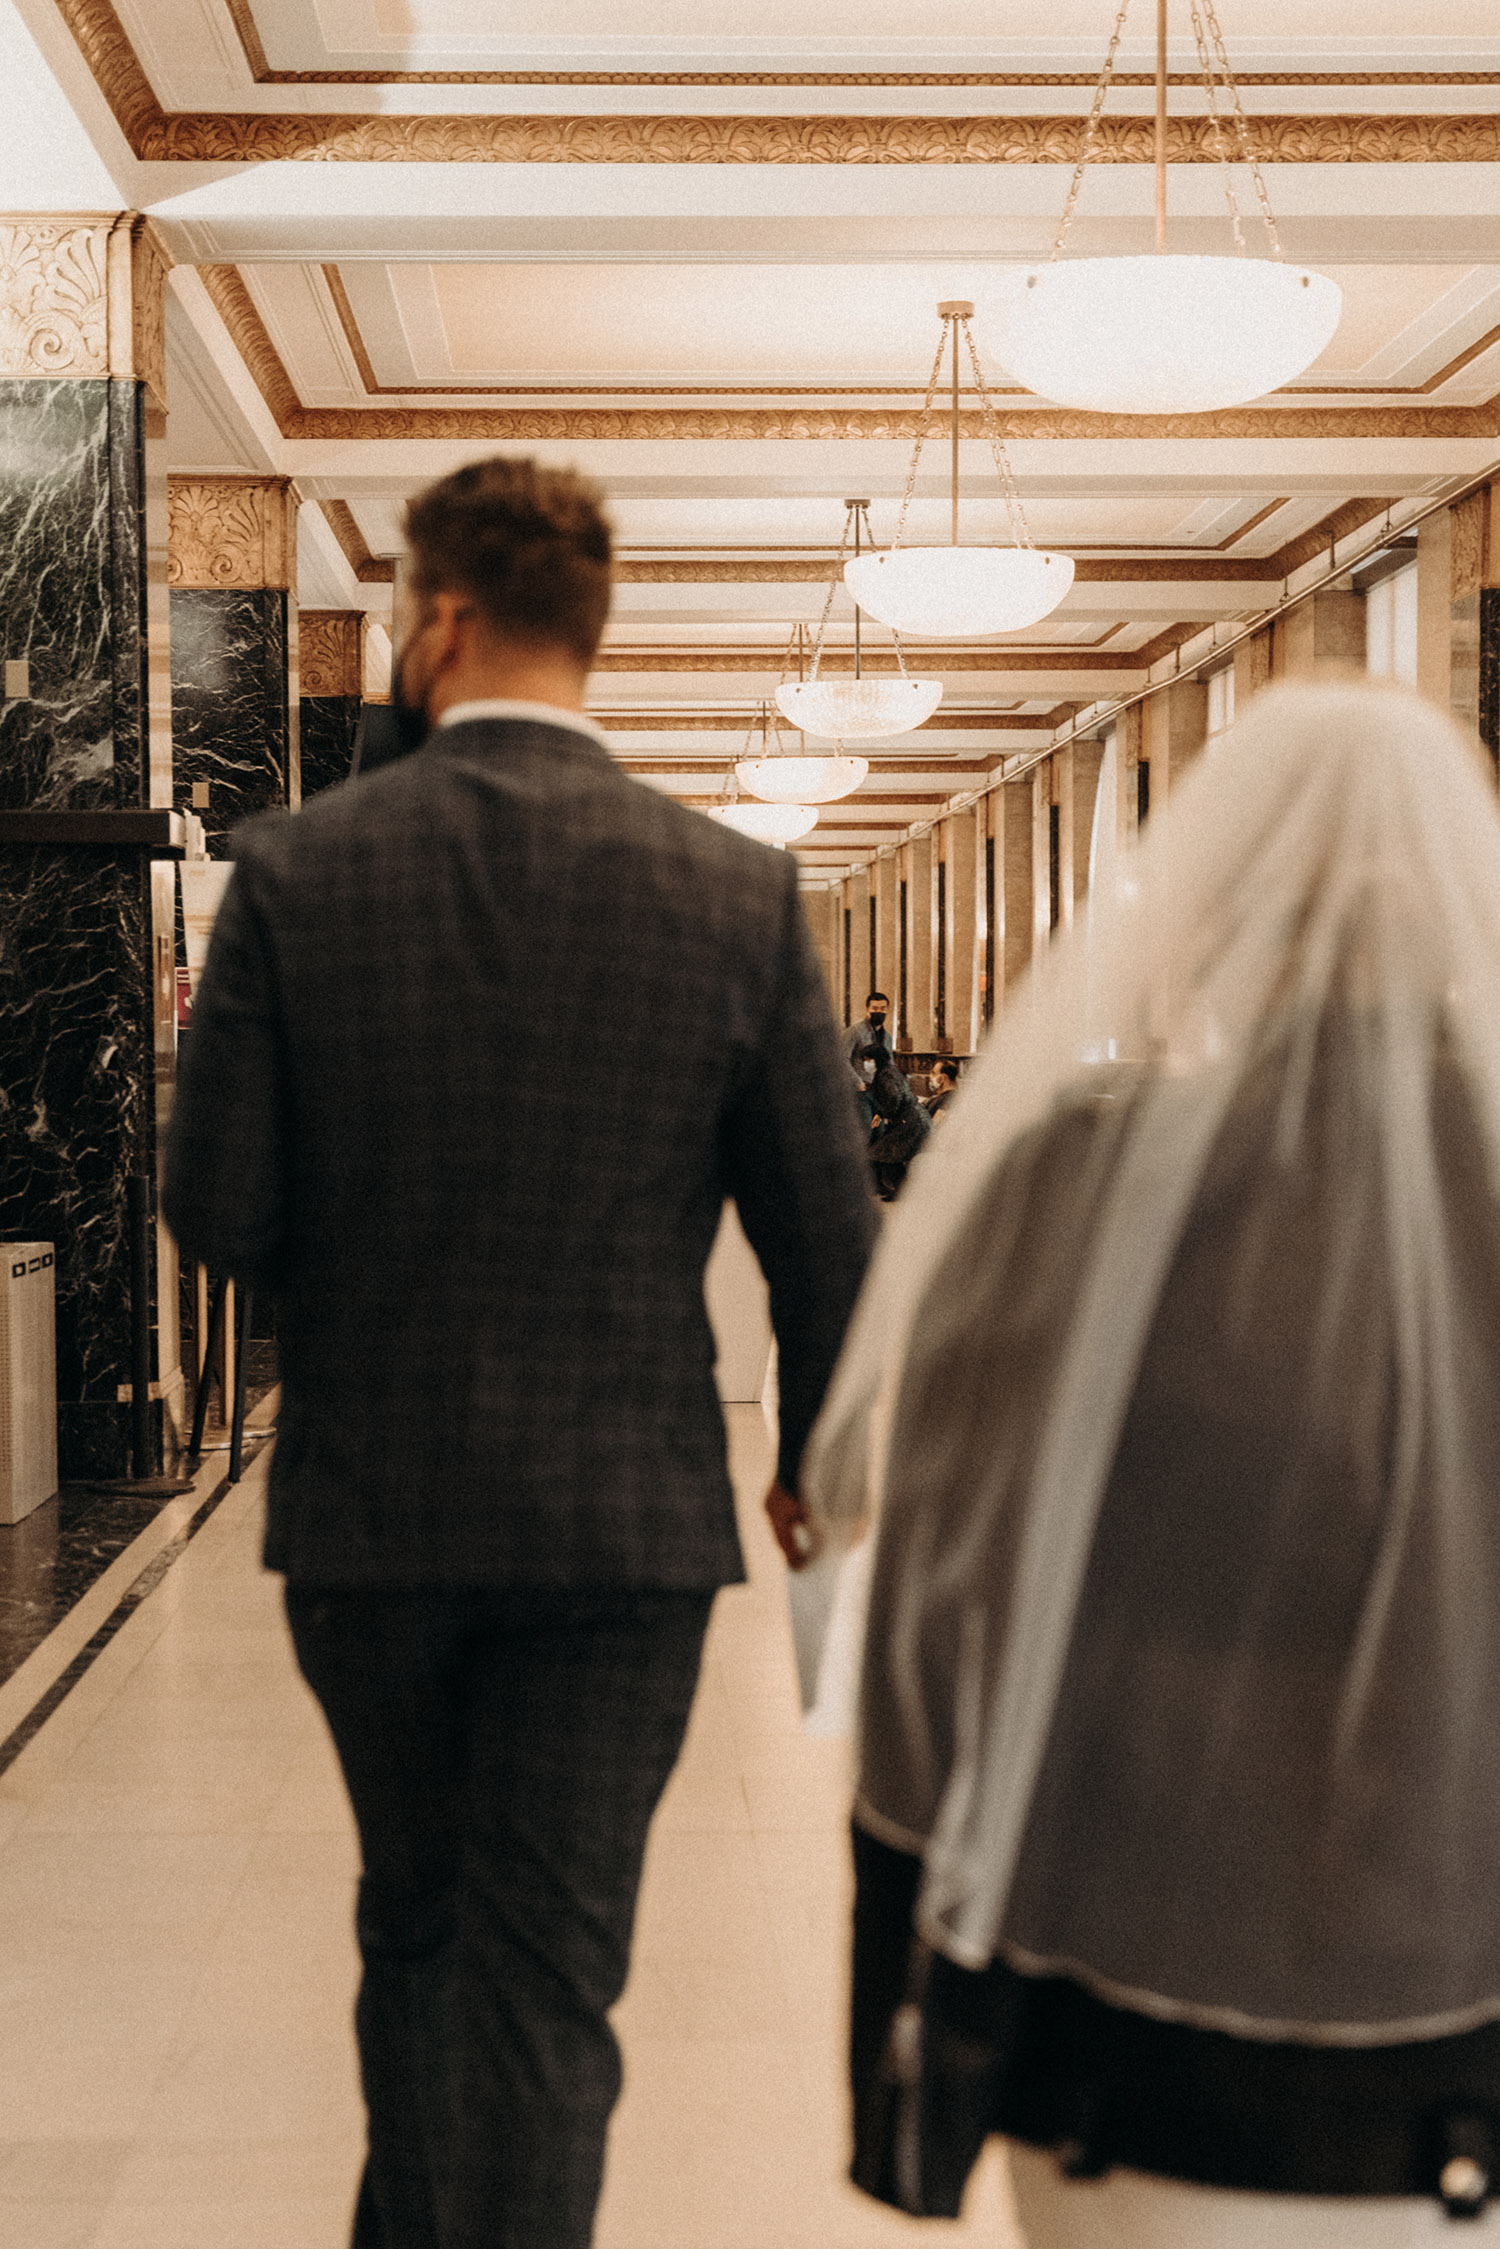 modern and playful city hall elopement photography in manhattan, new york